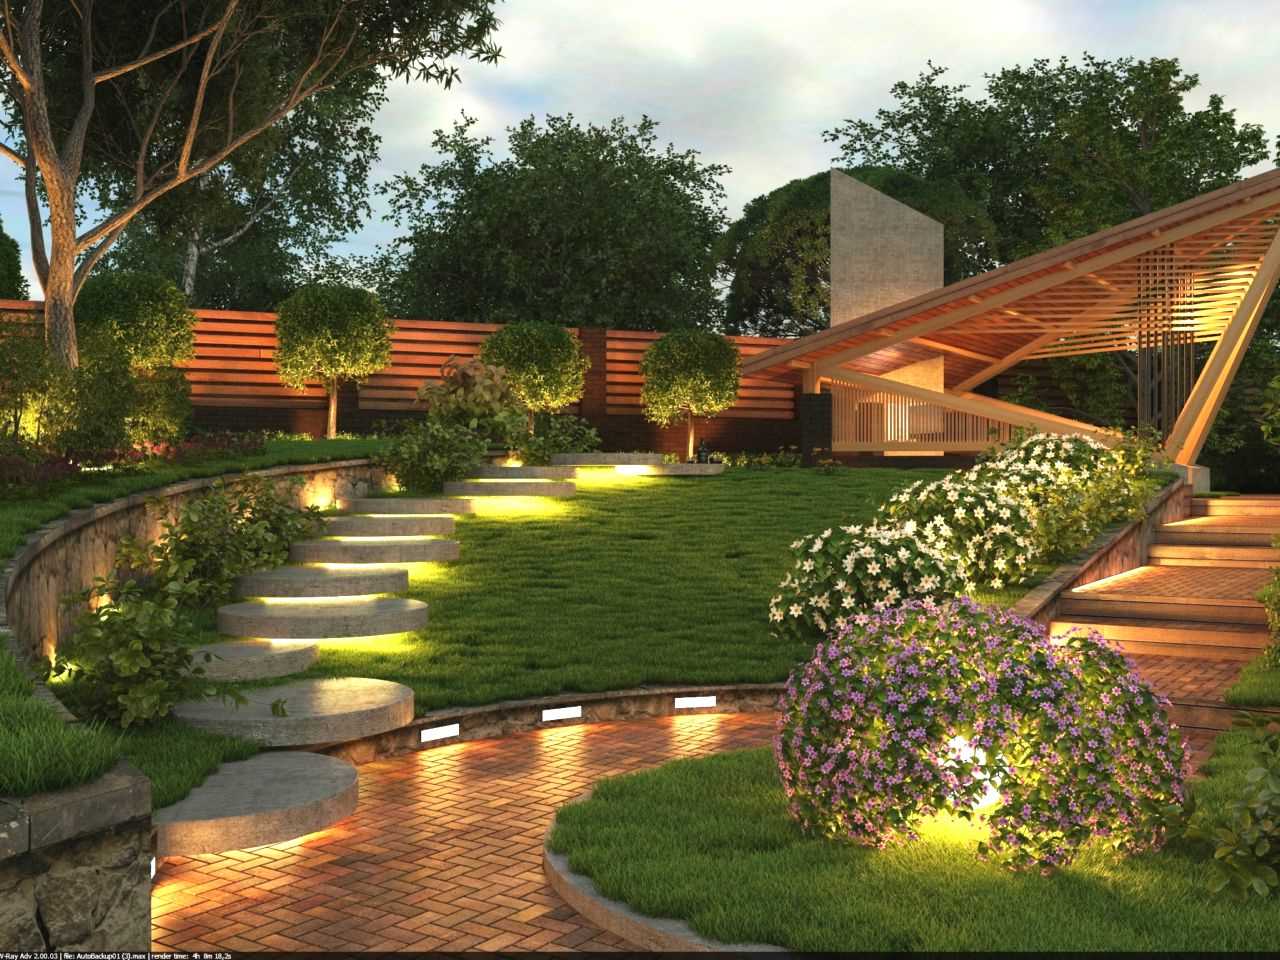 the idea of ​​using unusual plants in the landscape design of the house